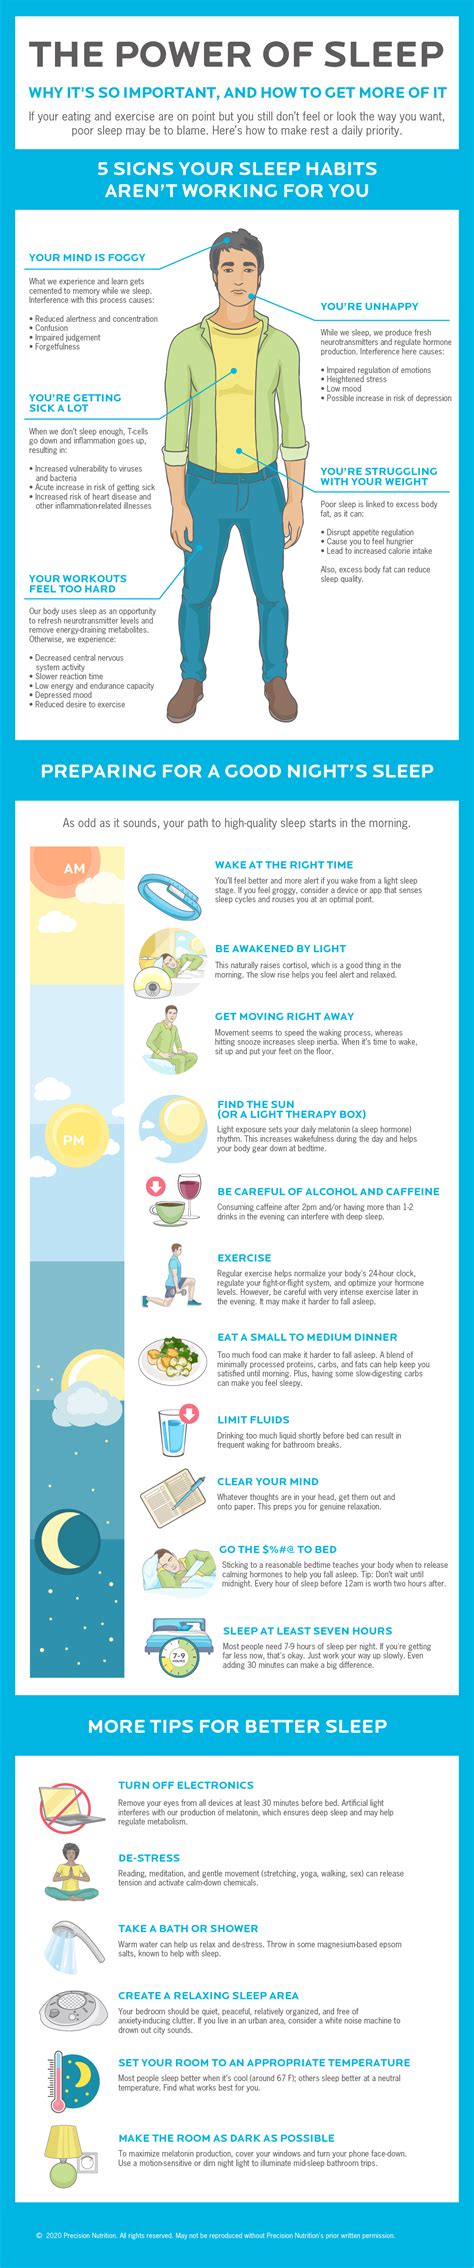 The Power Of Sleep Infographic Why Sleep Is So Important And How To